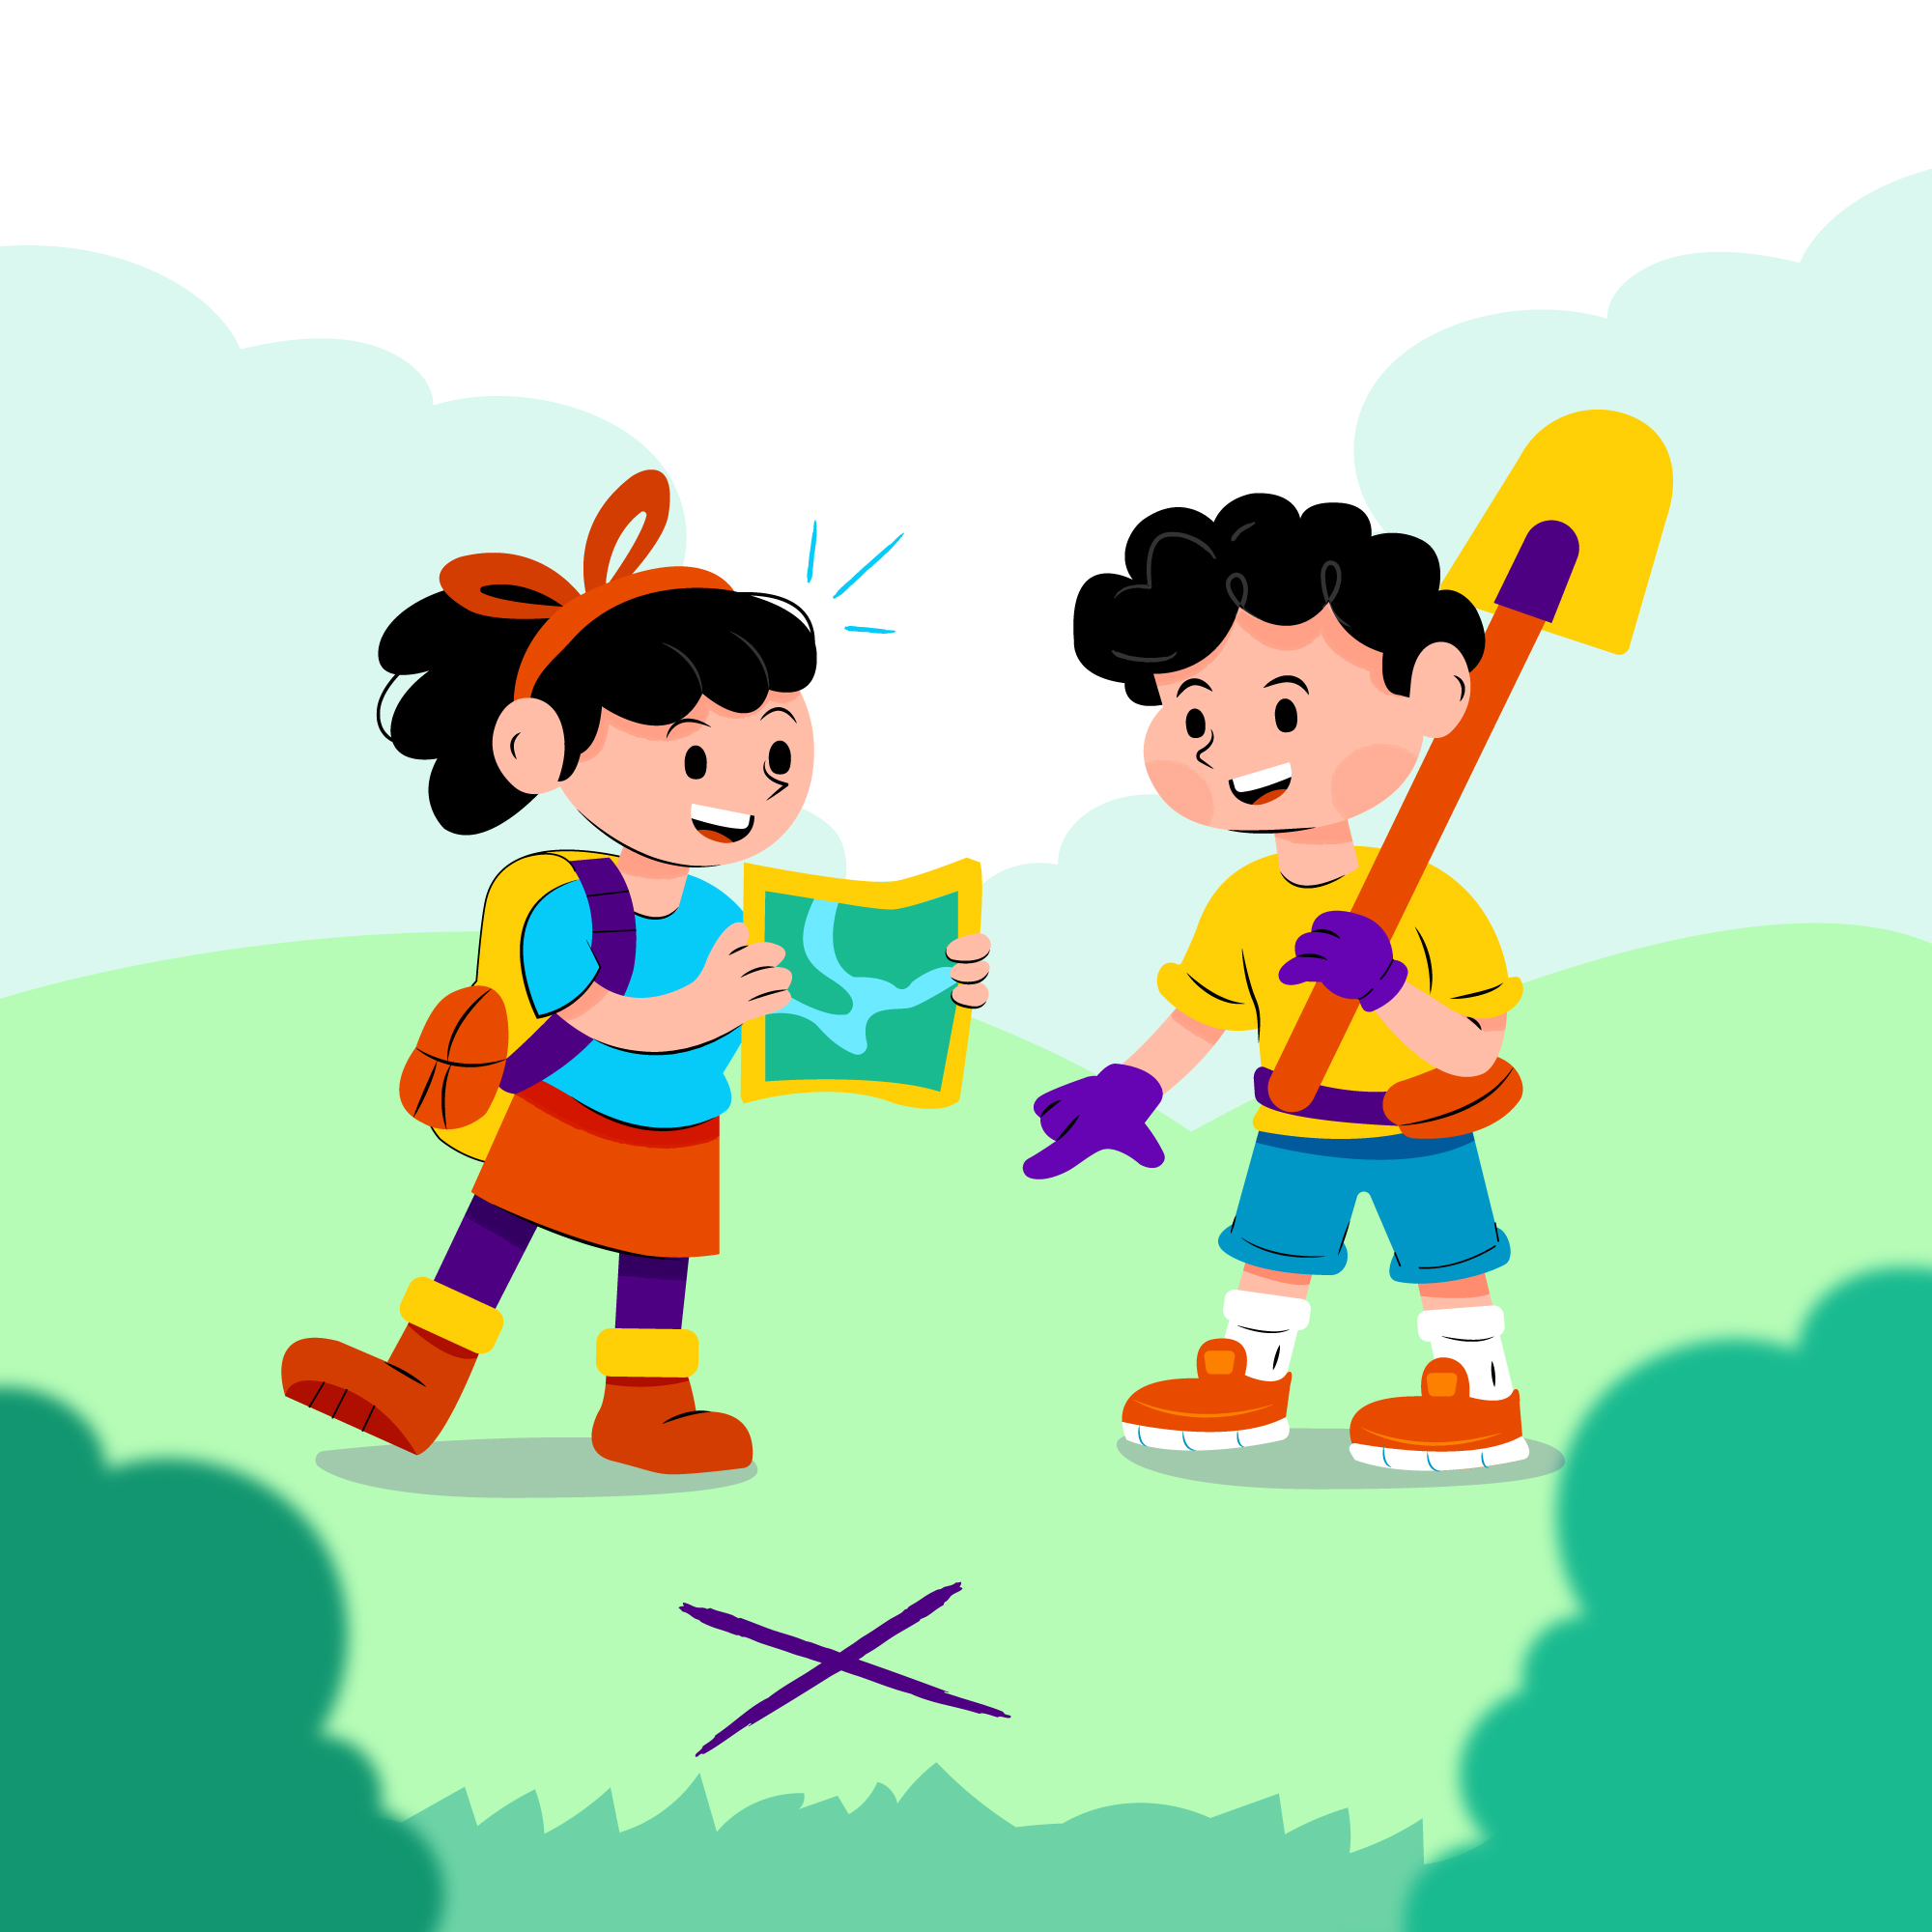 Pick up Valuable Skills of Problem Solving in Summer Camp